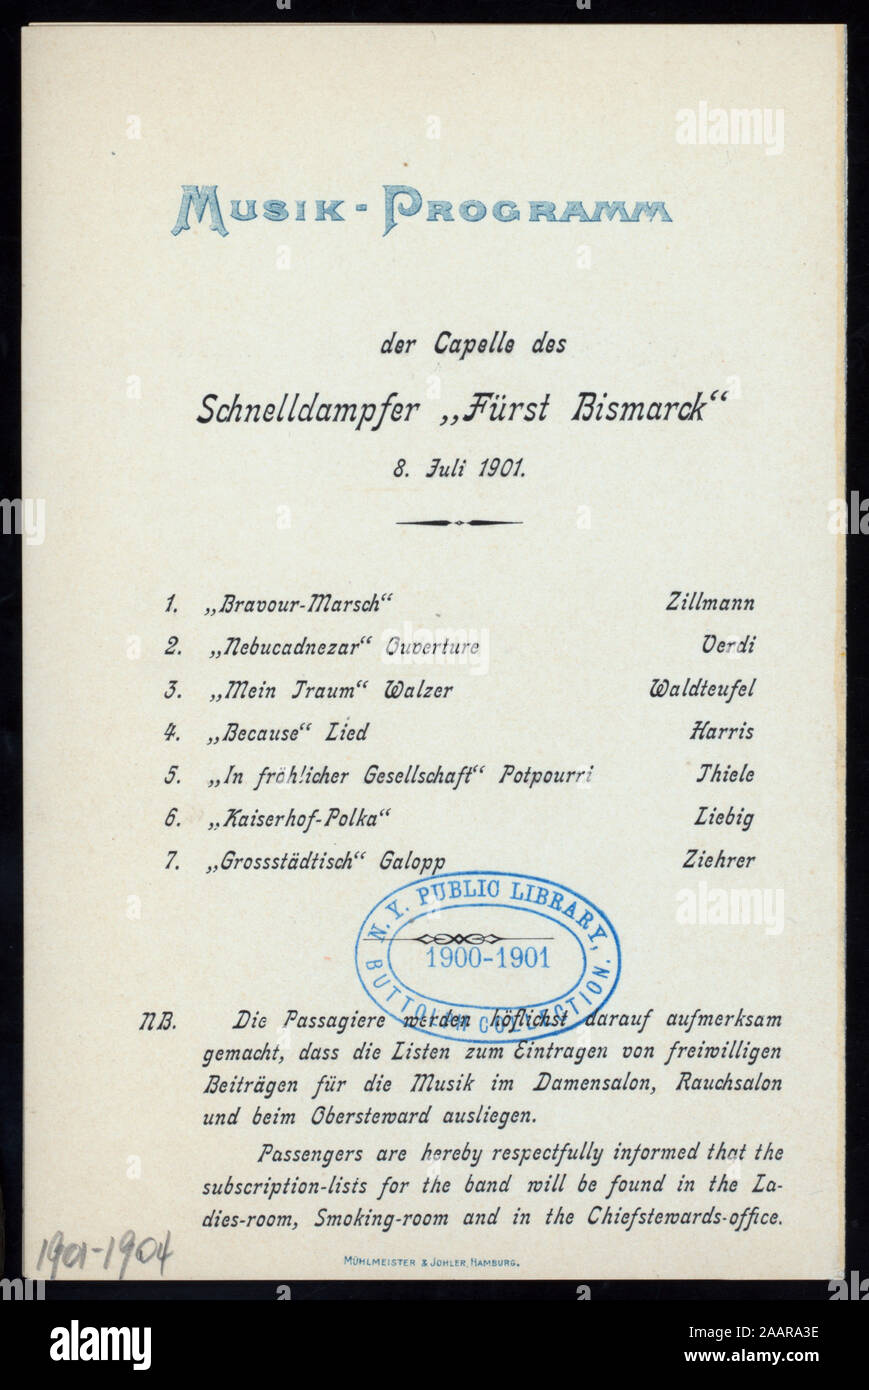 DINNER (held by) HAMBURG-AMERIKA LINIE (at) SS FURST BISMARCK (SS;) PASSENGERS ON DECK WITH LUGGAGE;  MENU IN GERMAN AND ENGLISH;  MUSICAL PROGRAM Citation/Reference: 1901-1904; DINNER [held by] HAMBURG-AMERIKA LINIE [at] SS FURST BISMARCK (SS;) Stock Photo